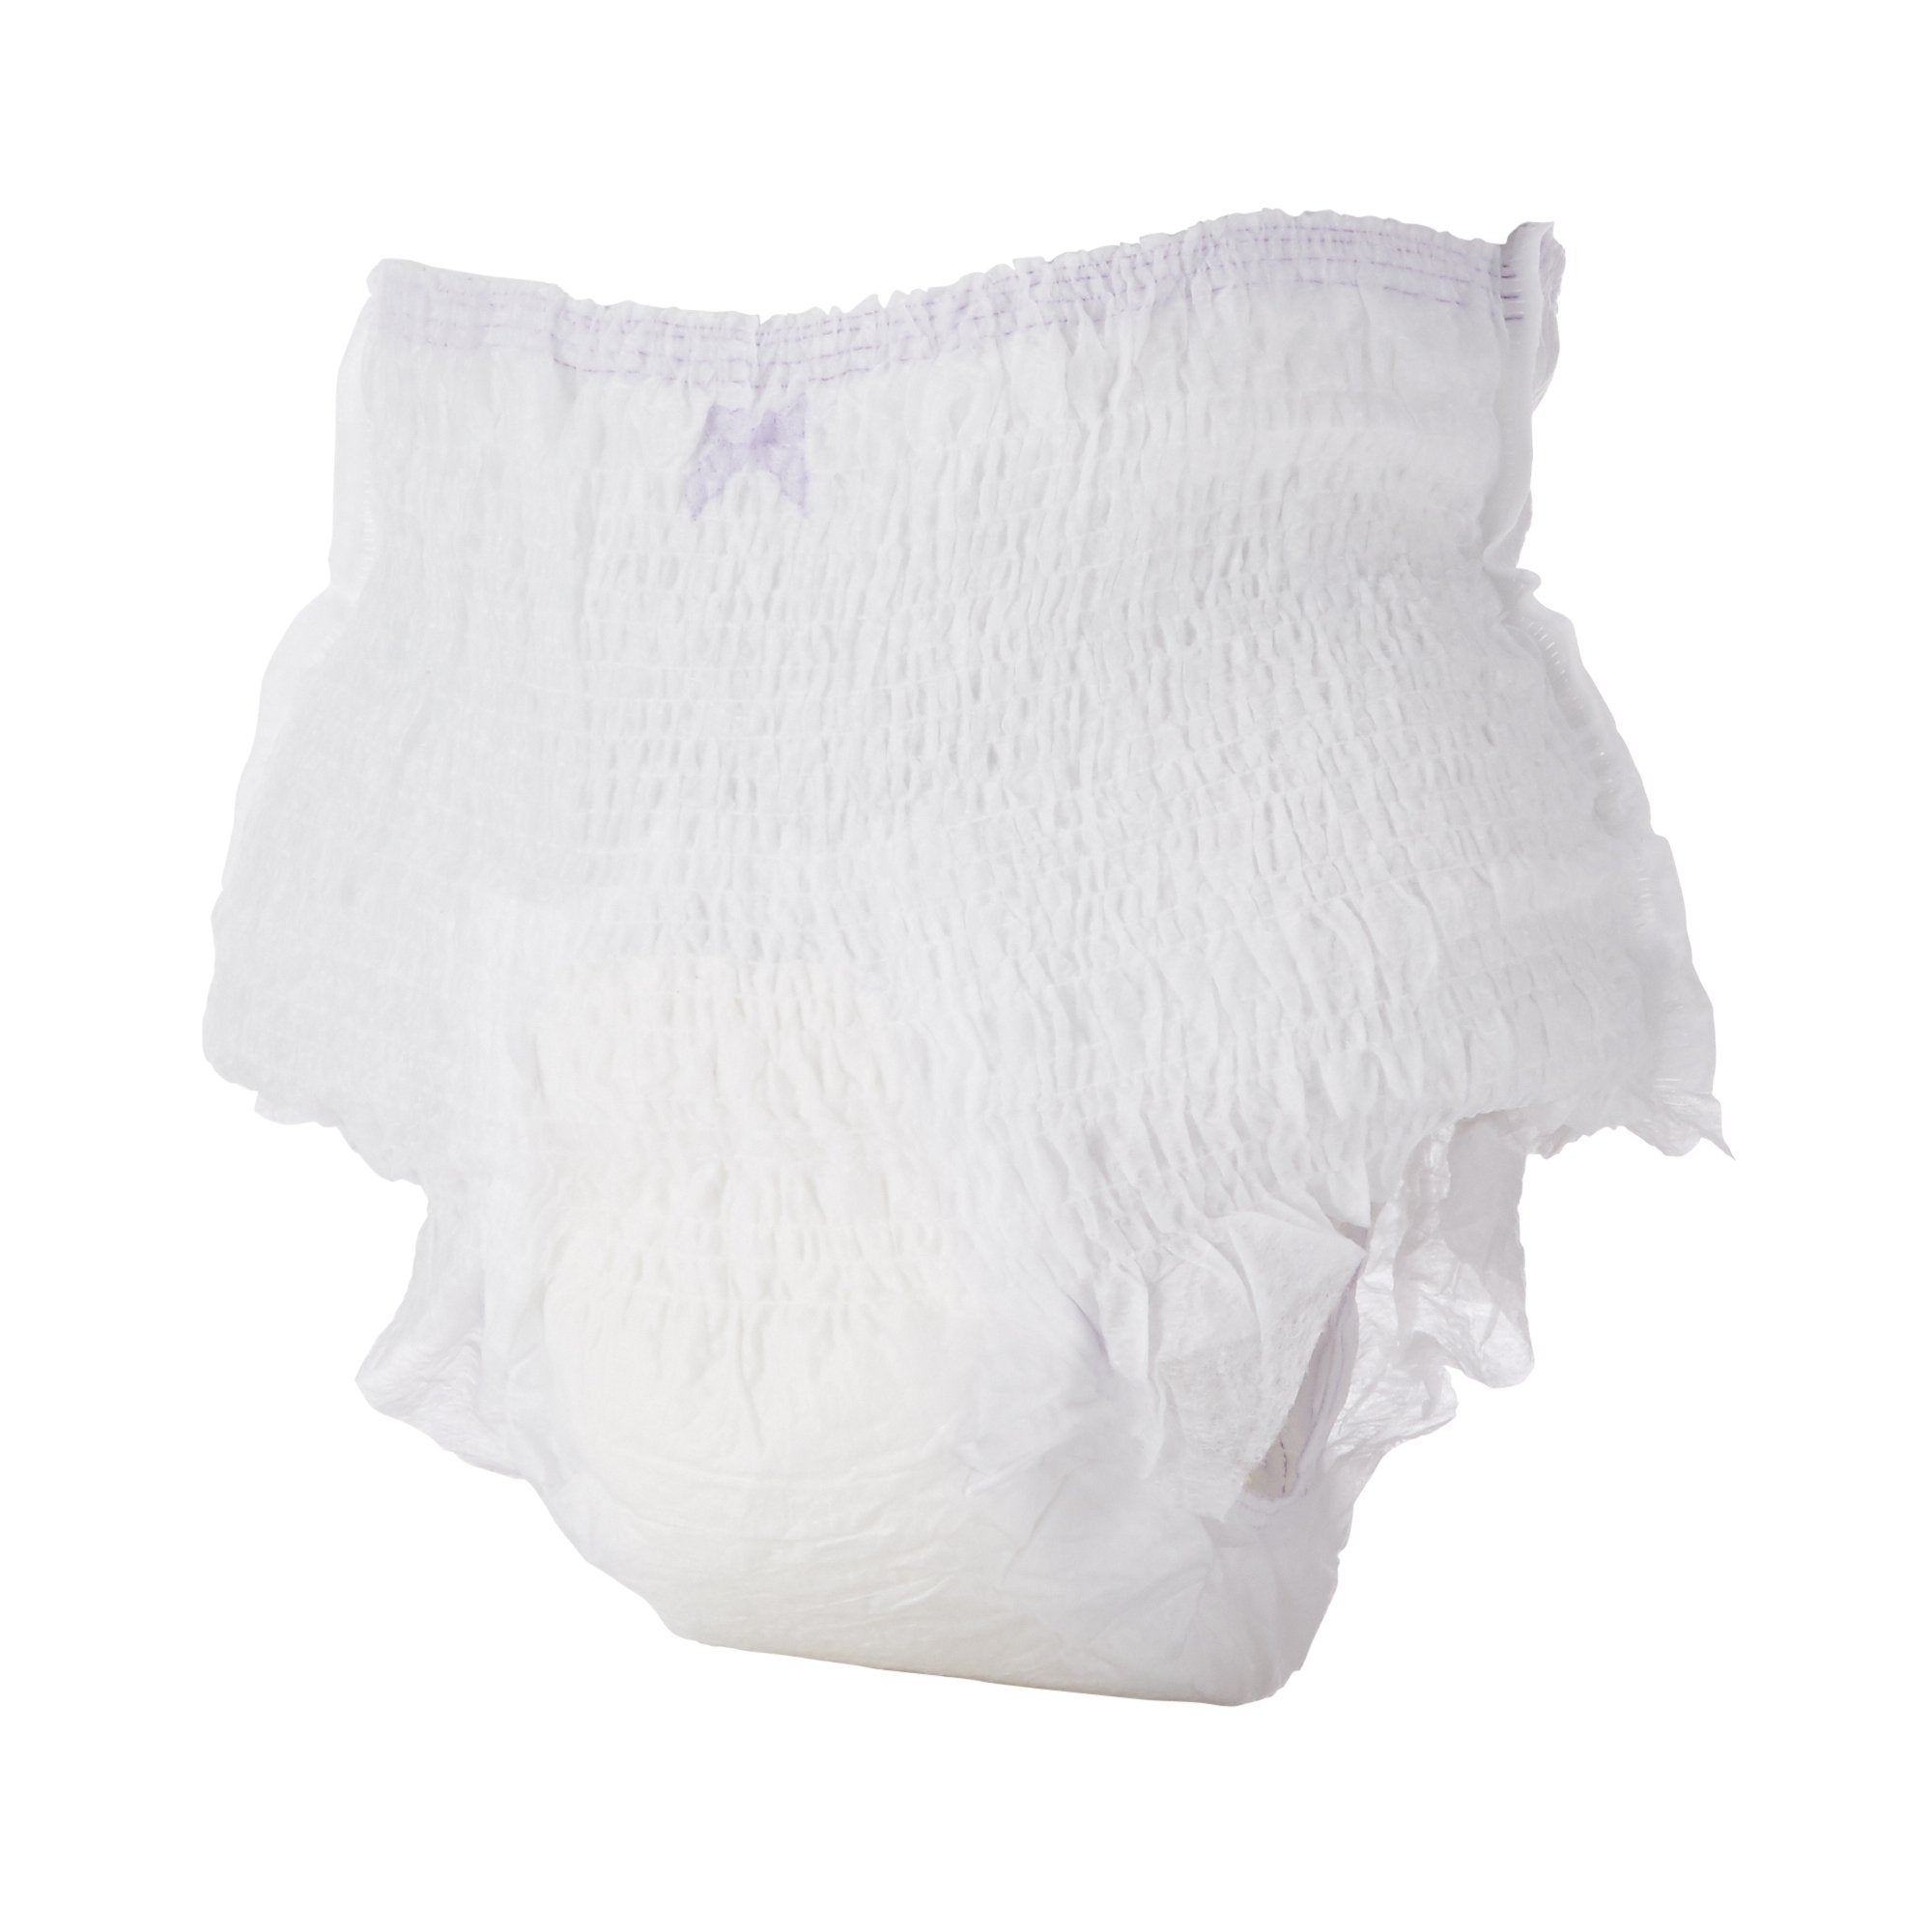 Female Adult Absorbent Underwear Always Discreet Pull On with Tear Away Seams Large Disposable Heavy Absorbency